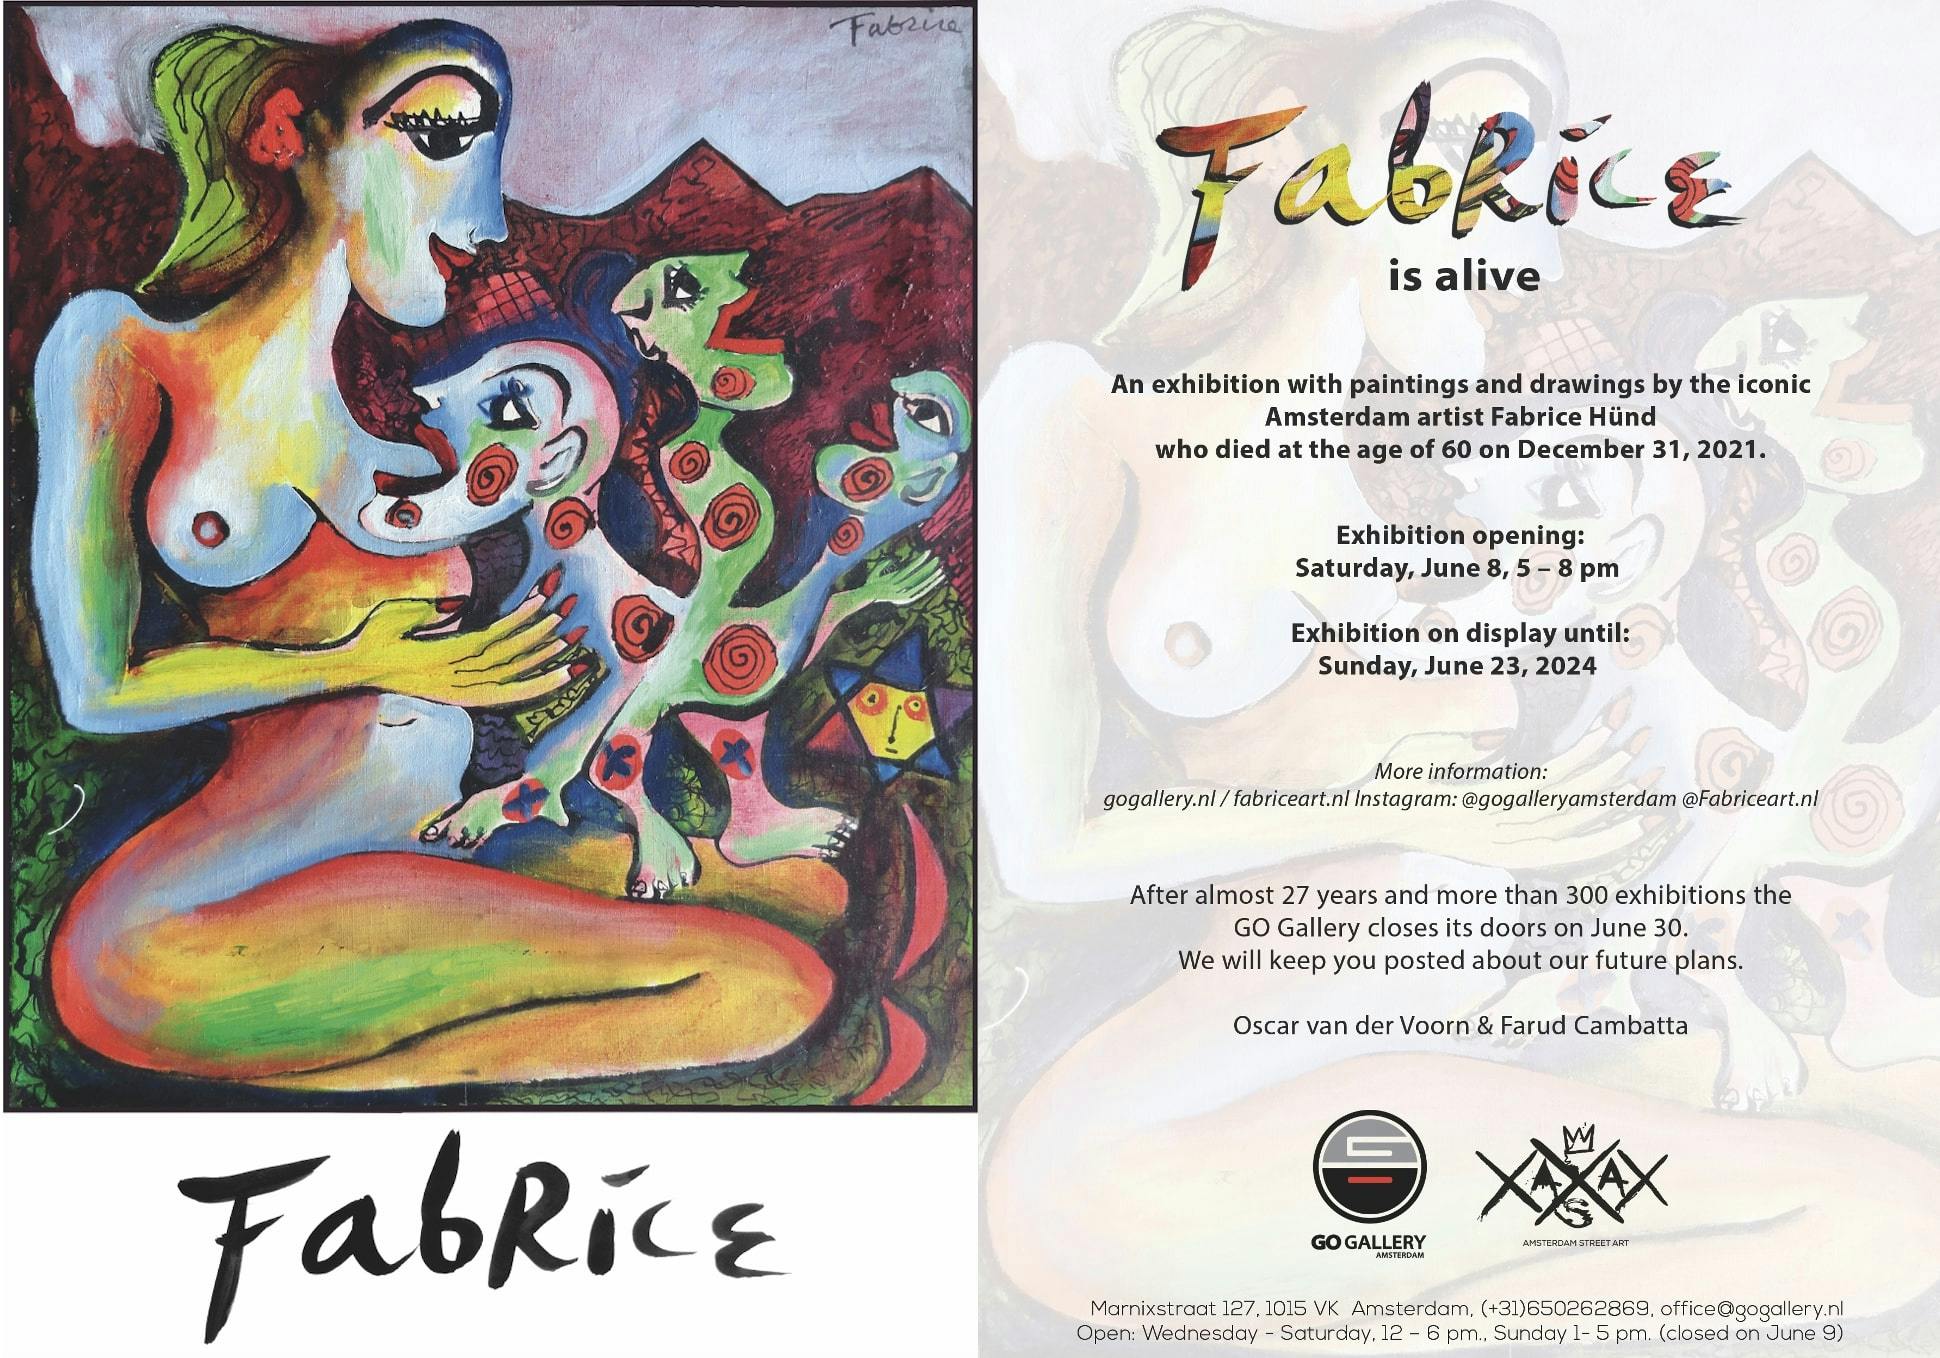 Fabrice is Alive